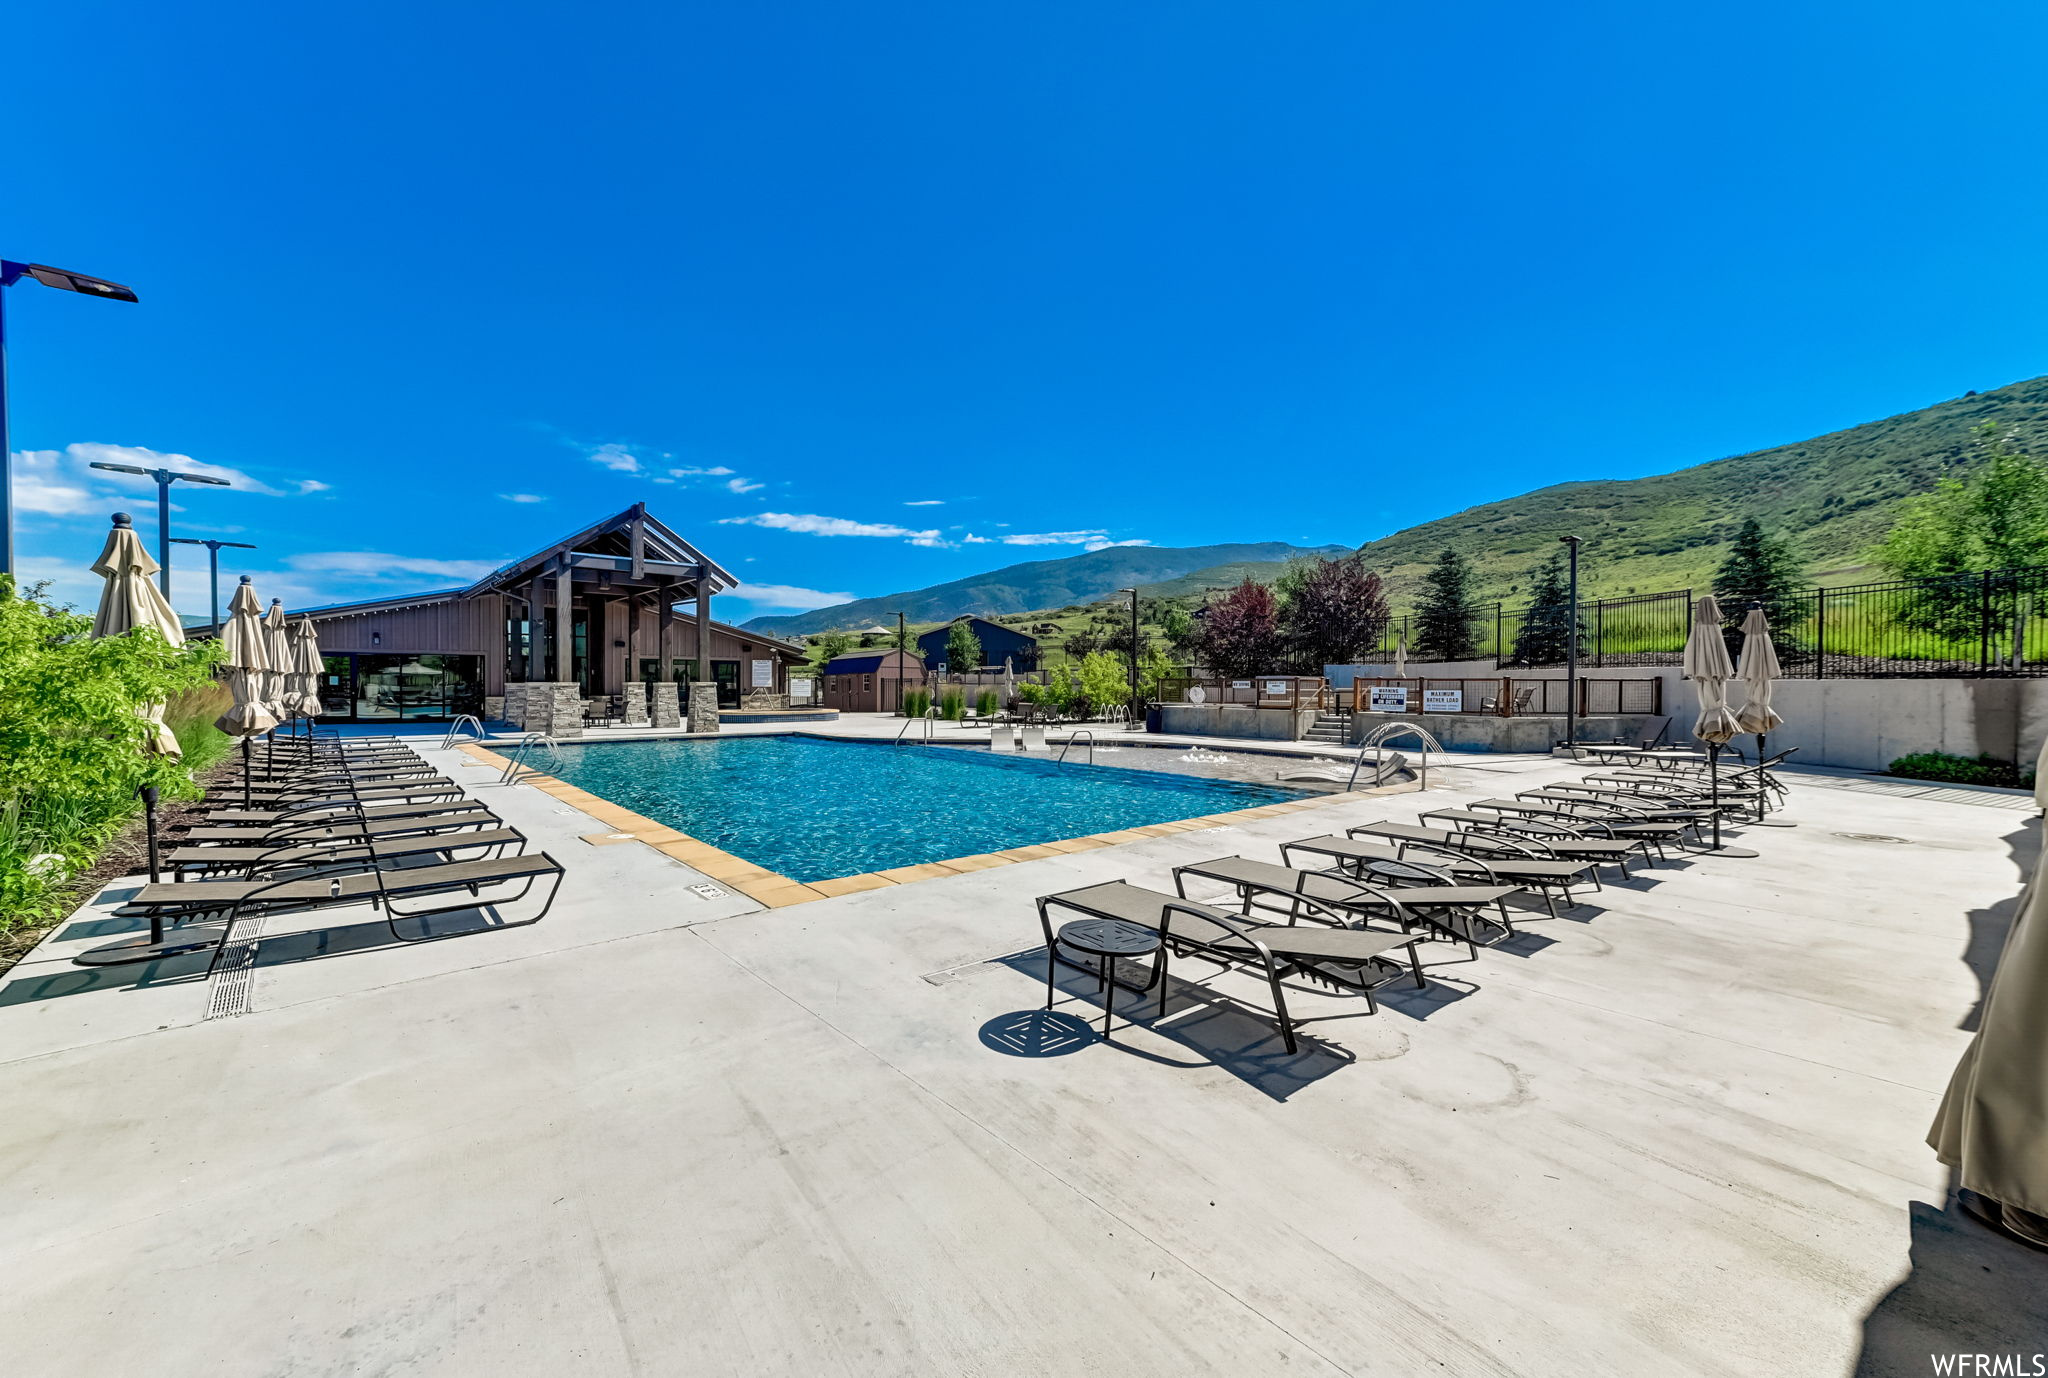 View of swimming pool featuring a patio area and a mountain view